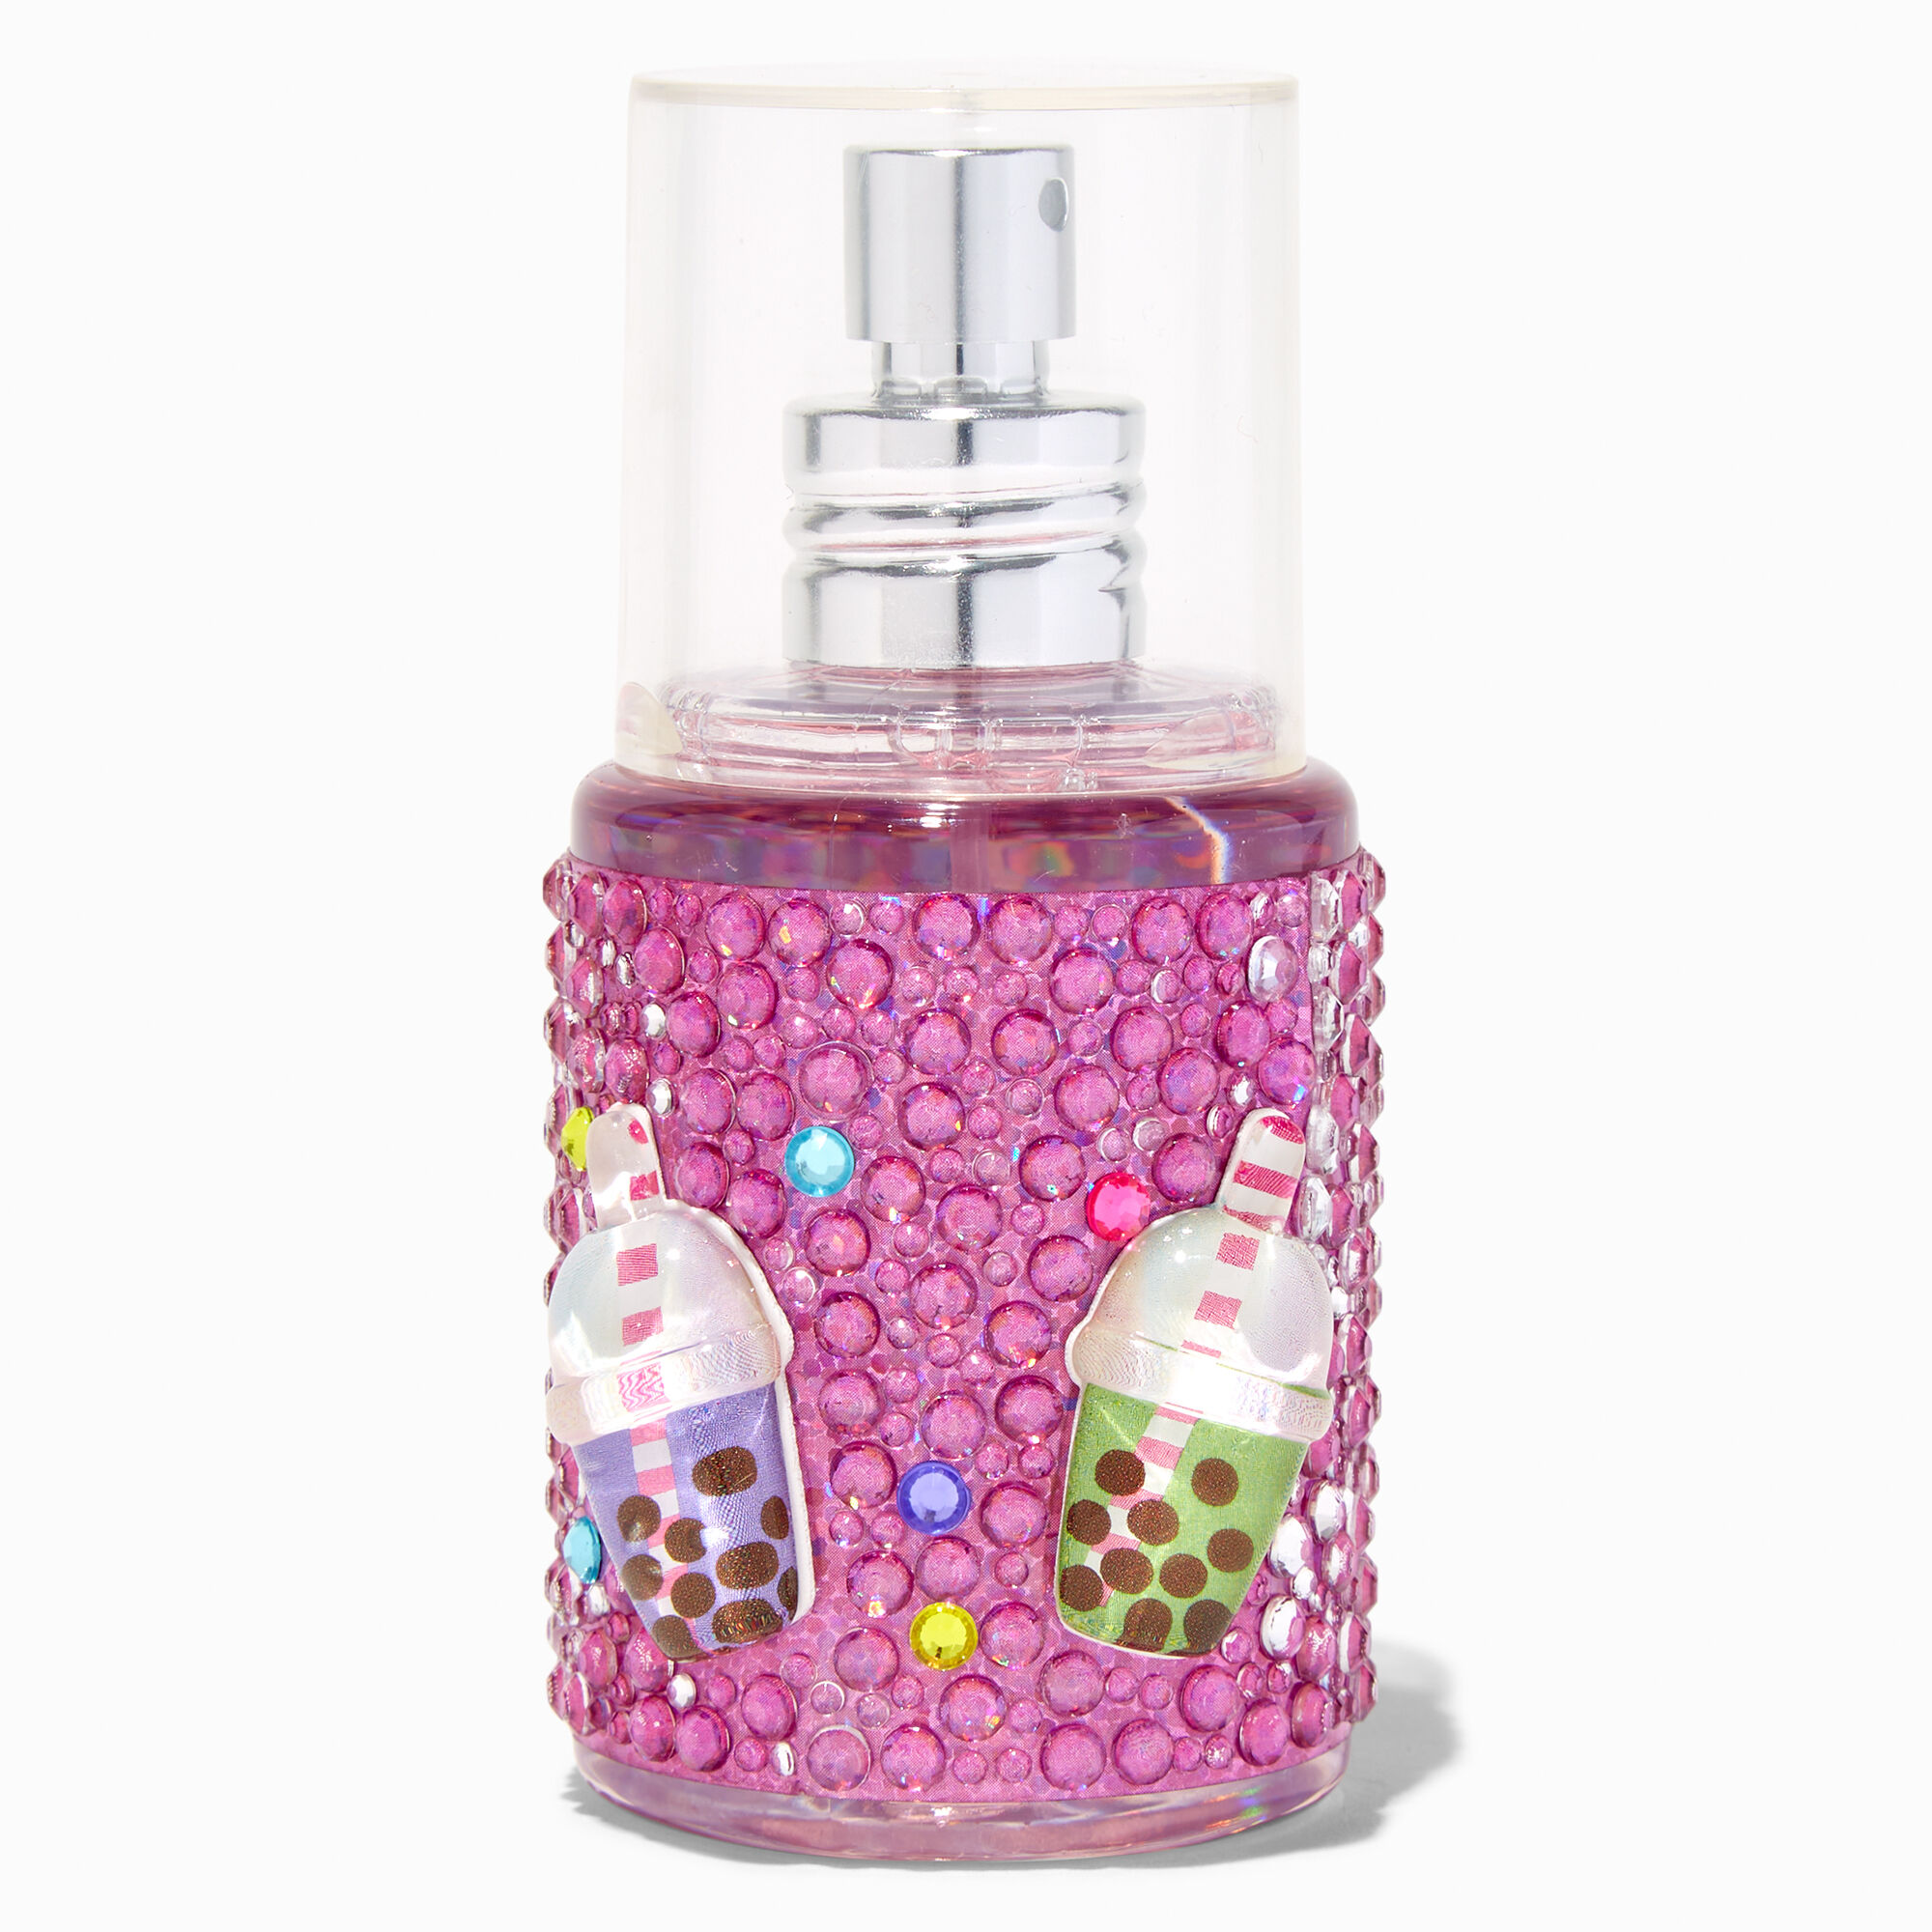 View Claires Boba Tea Bling Body Spray Rainbow information